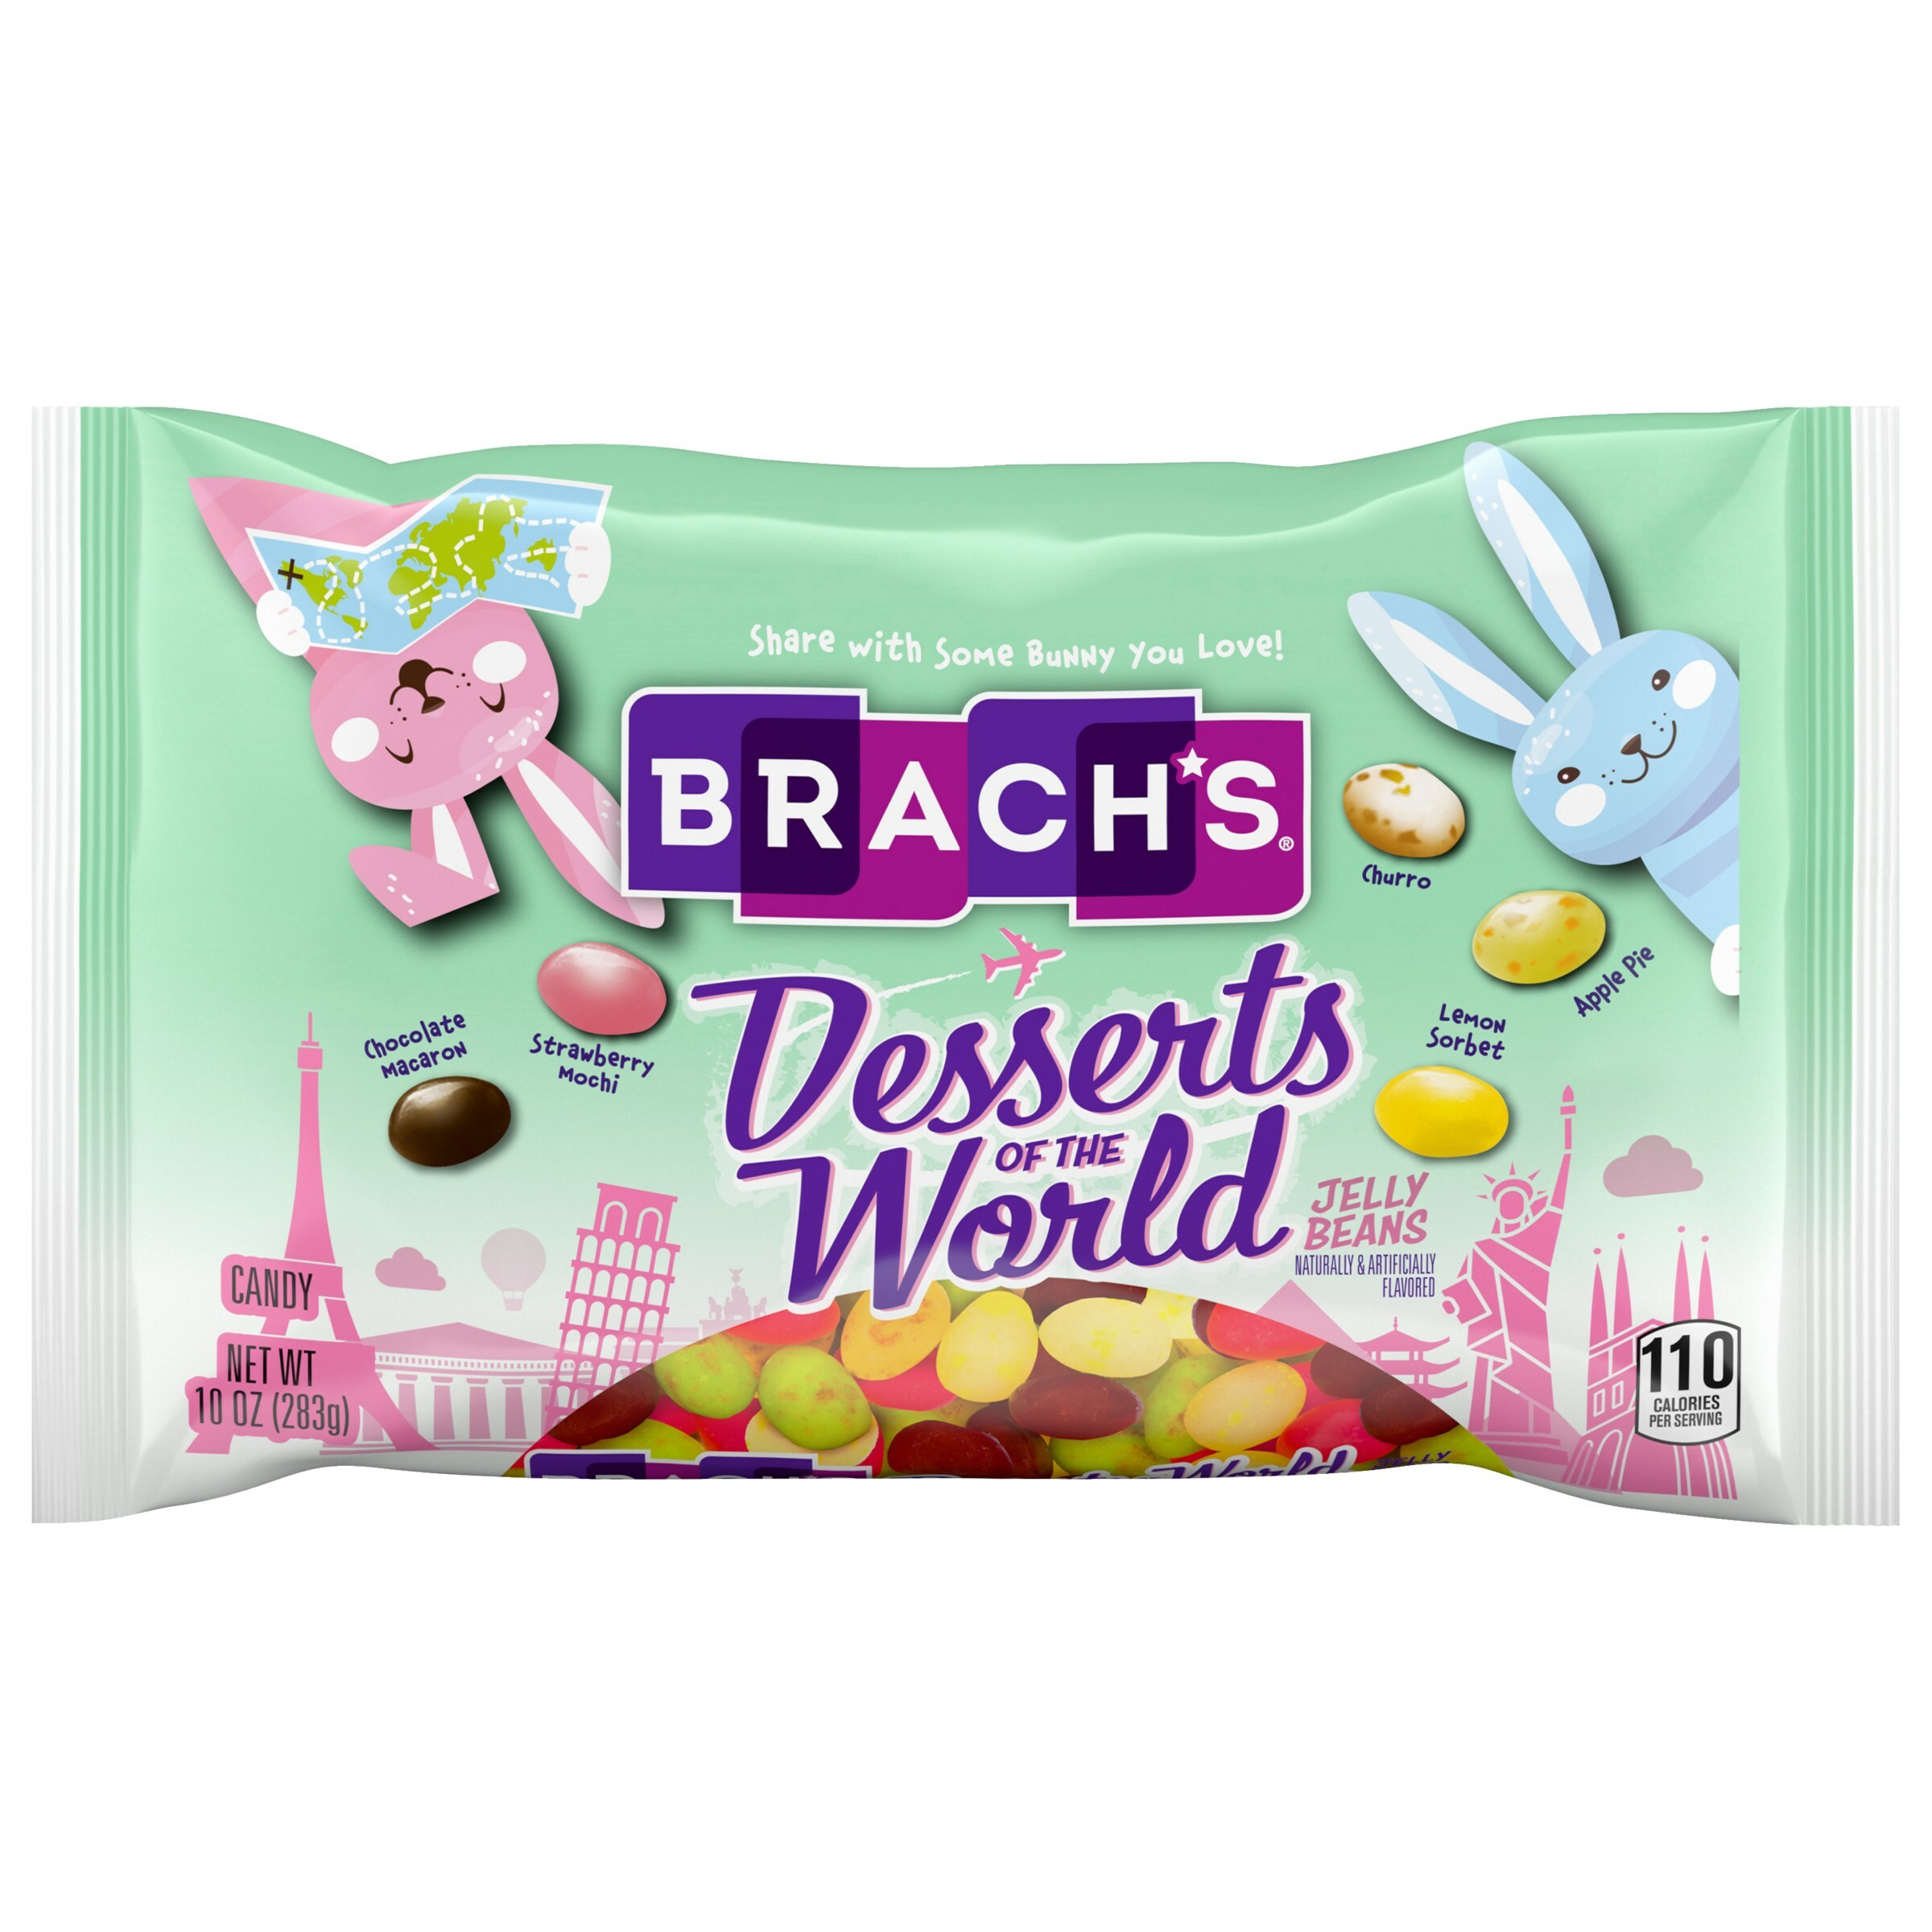 BRACH’S® New Desserts of the World Jelly Beans Take Taste Buds on a Global Adventure This Spring